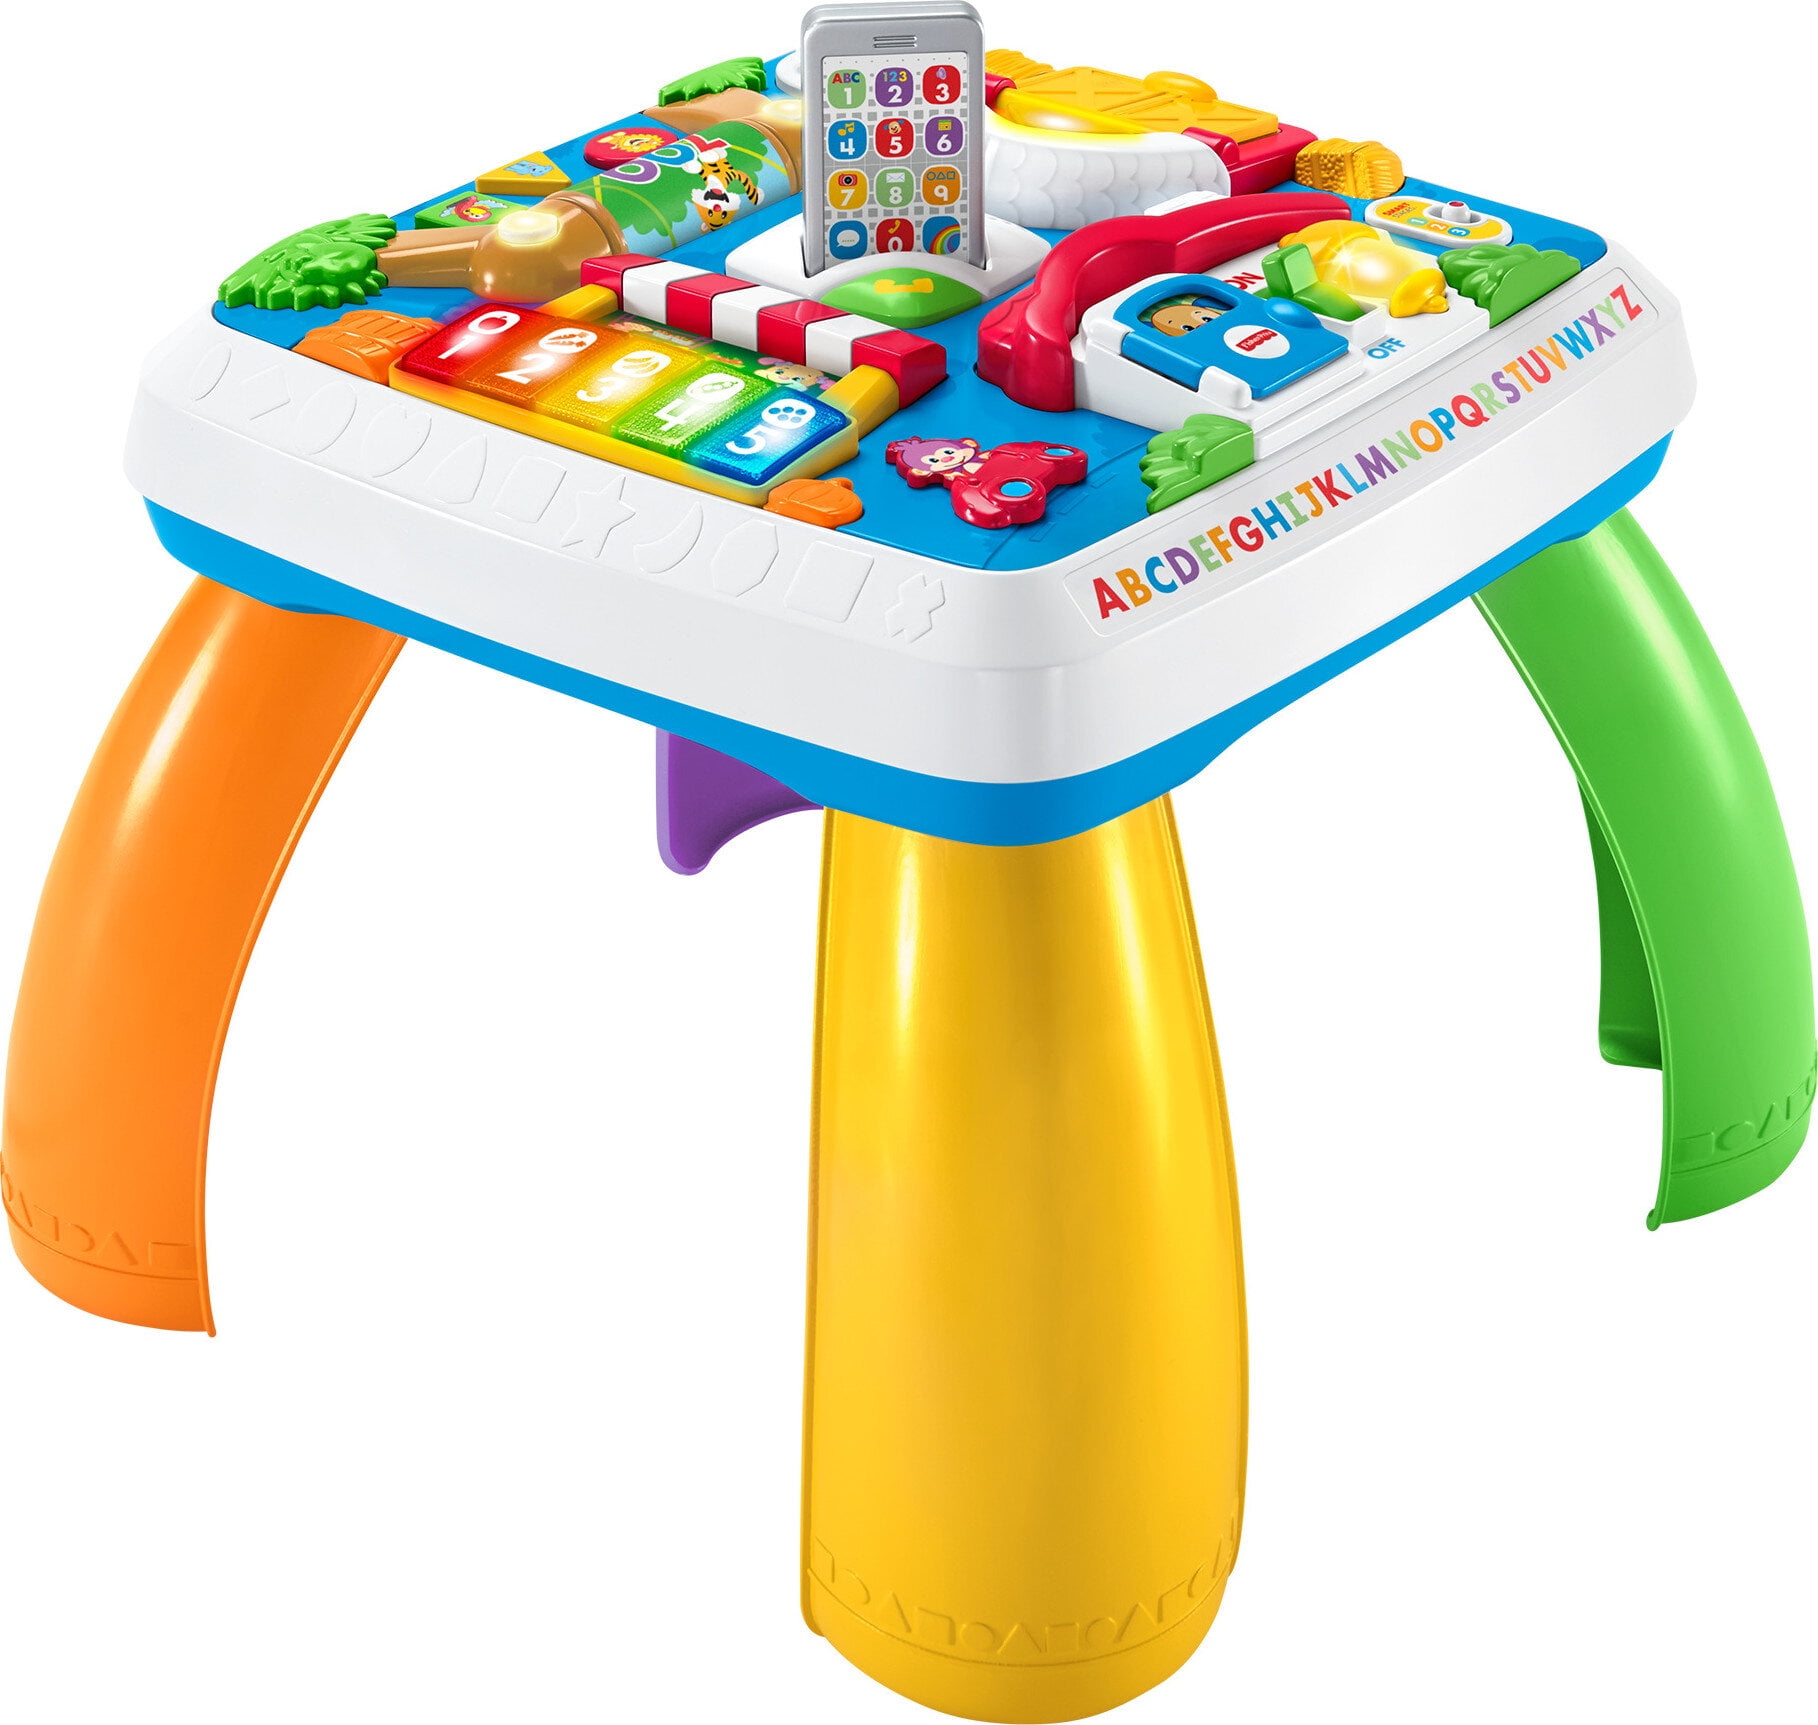 Afwijzen Elk jaar Koel Fisher-Price Laugh & Learn Around the Town Learning Table Baby & Toddler  Toy with Music & Lights - Walmart.com